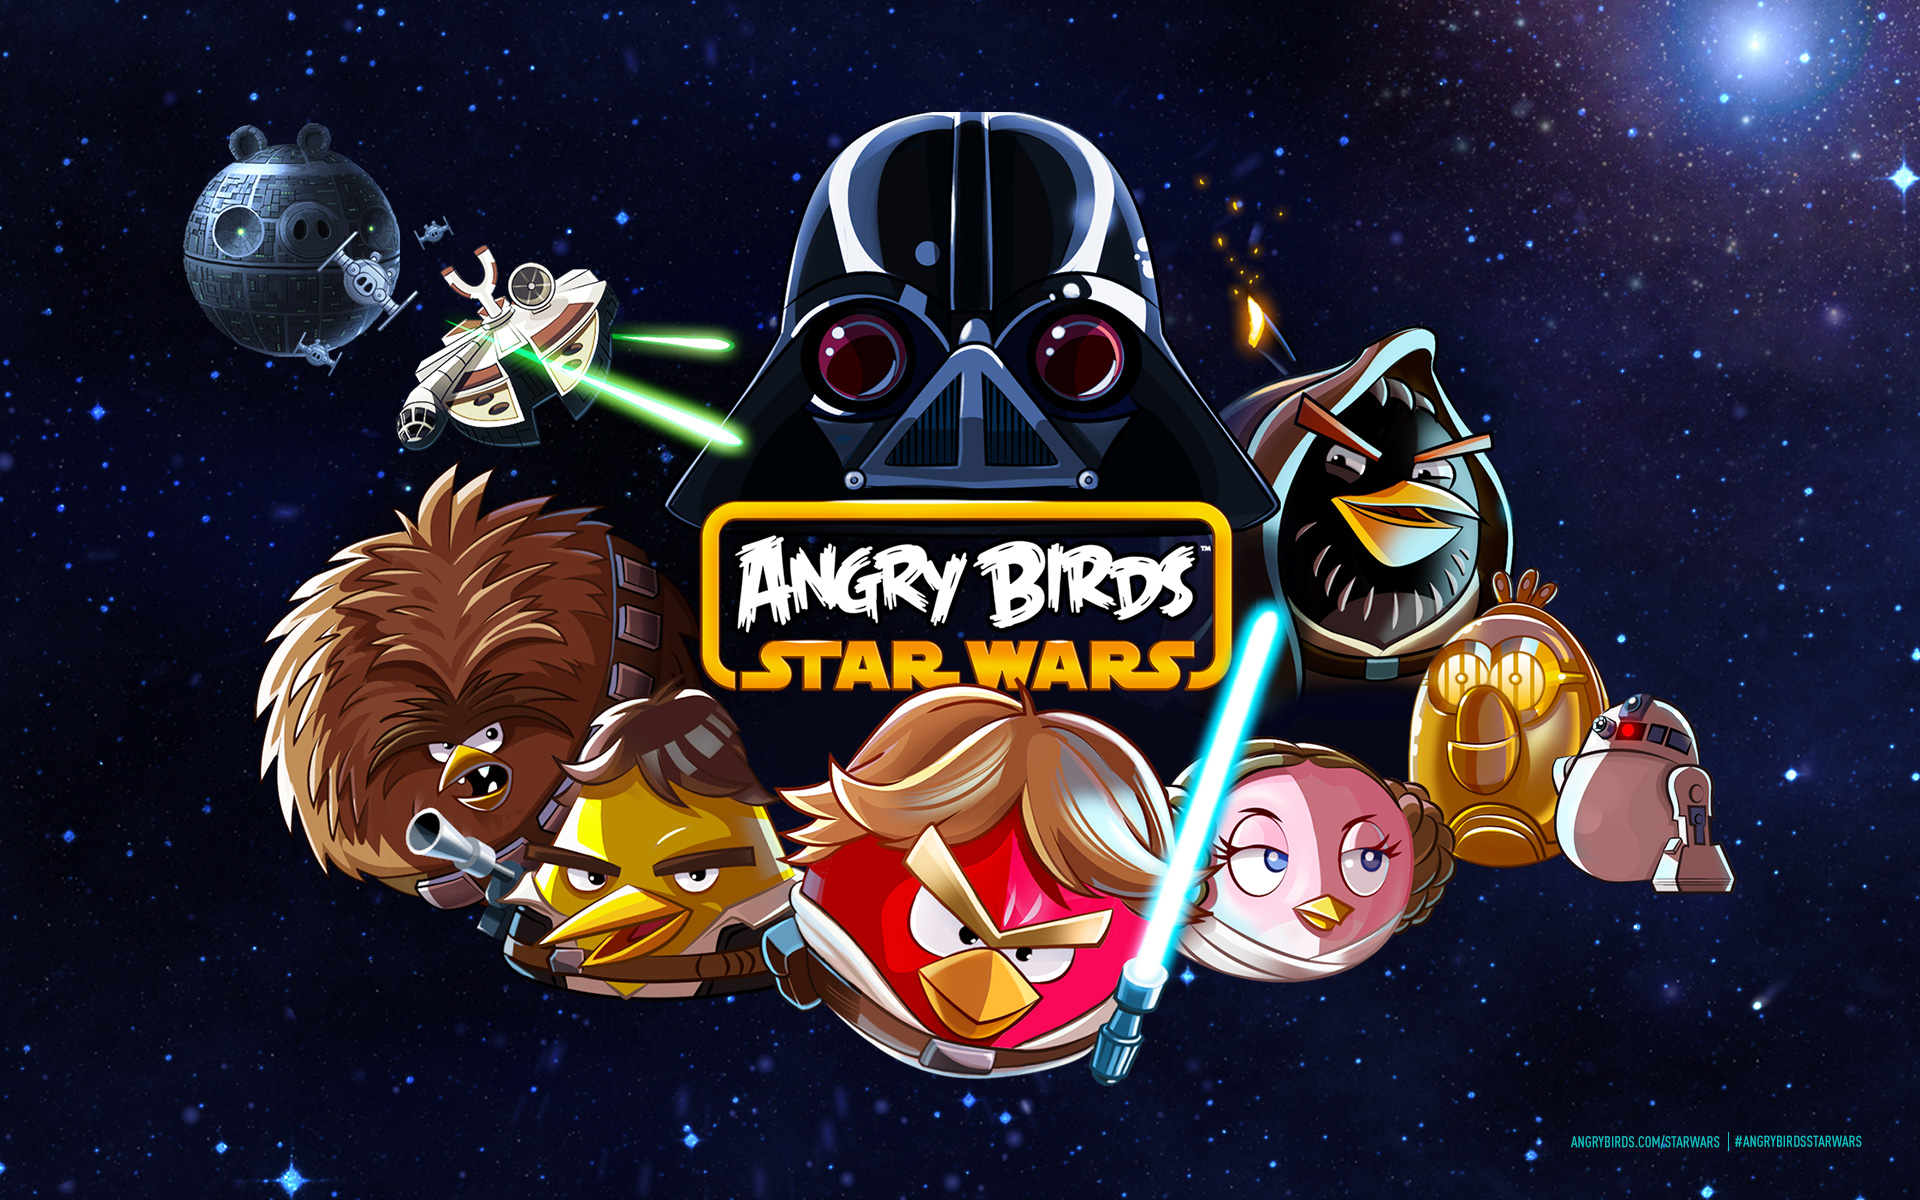 Angry Birds Star Wars “Path of the Jedi” Dodgy Download Fixed – How to Get Extra Levels!